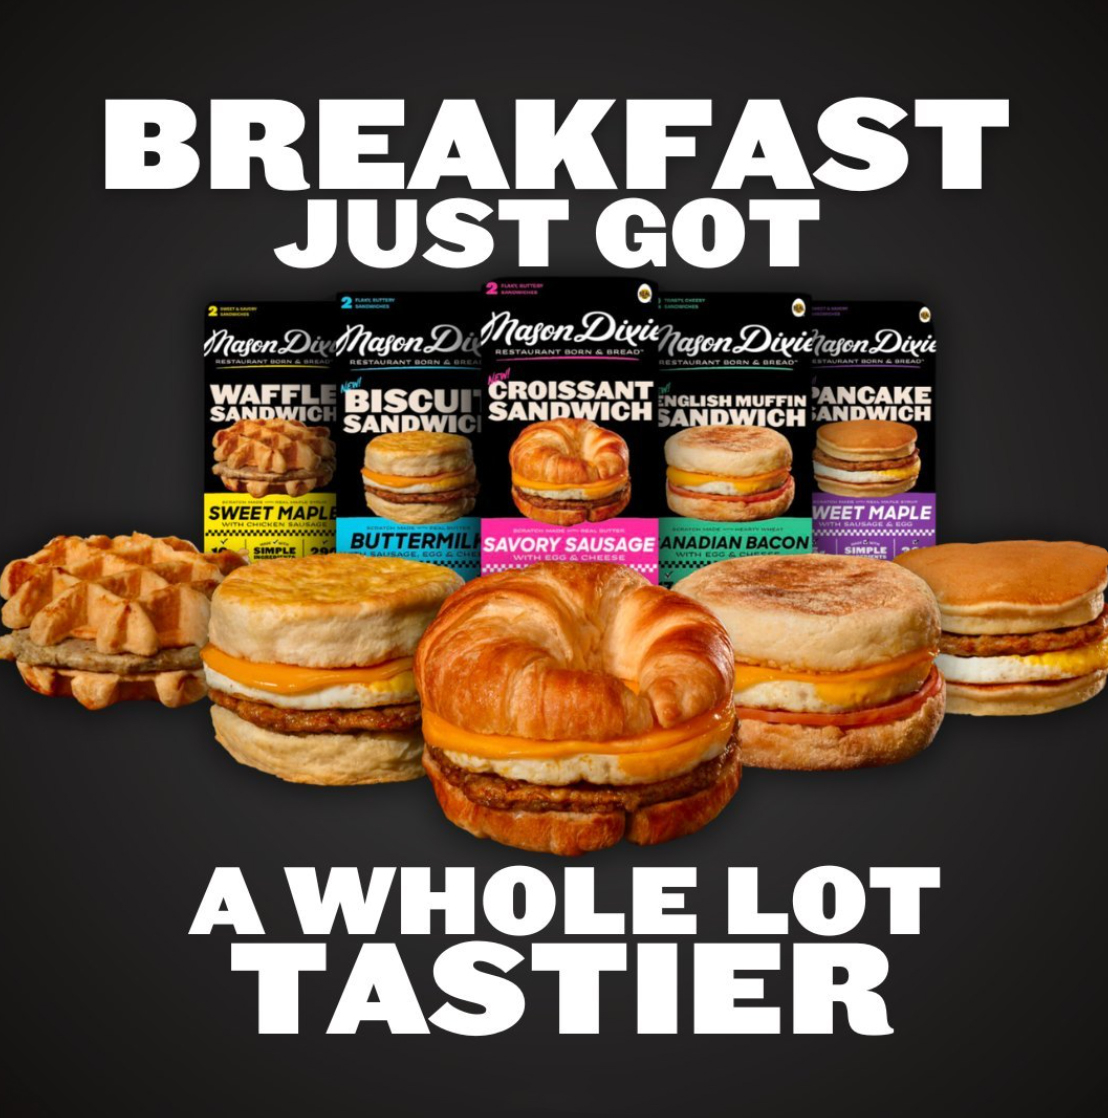 Advertisement for various breakfast sandwiches with descriptive text and flavor tags